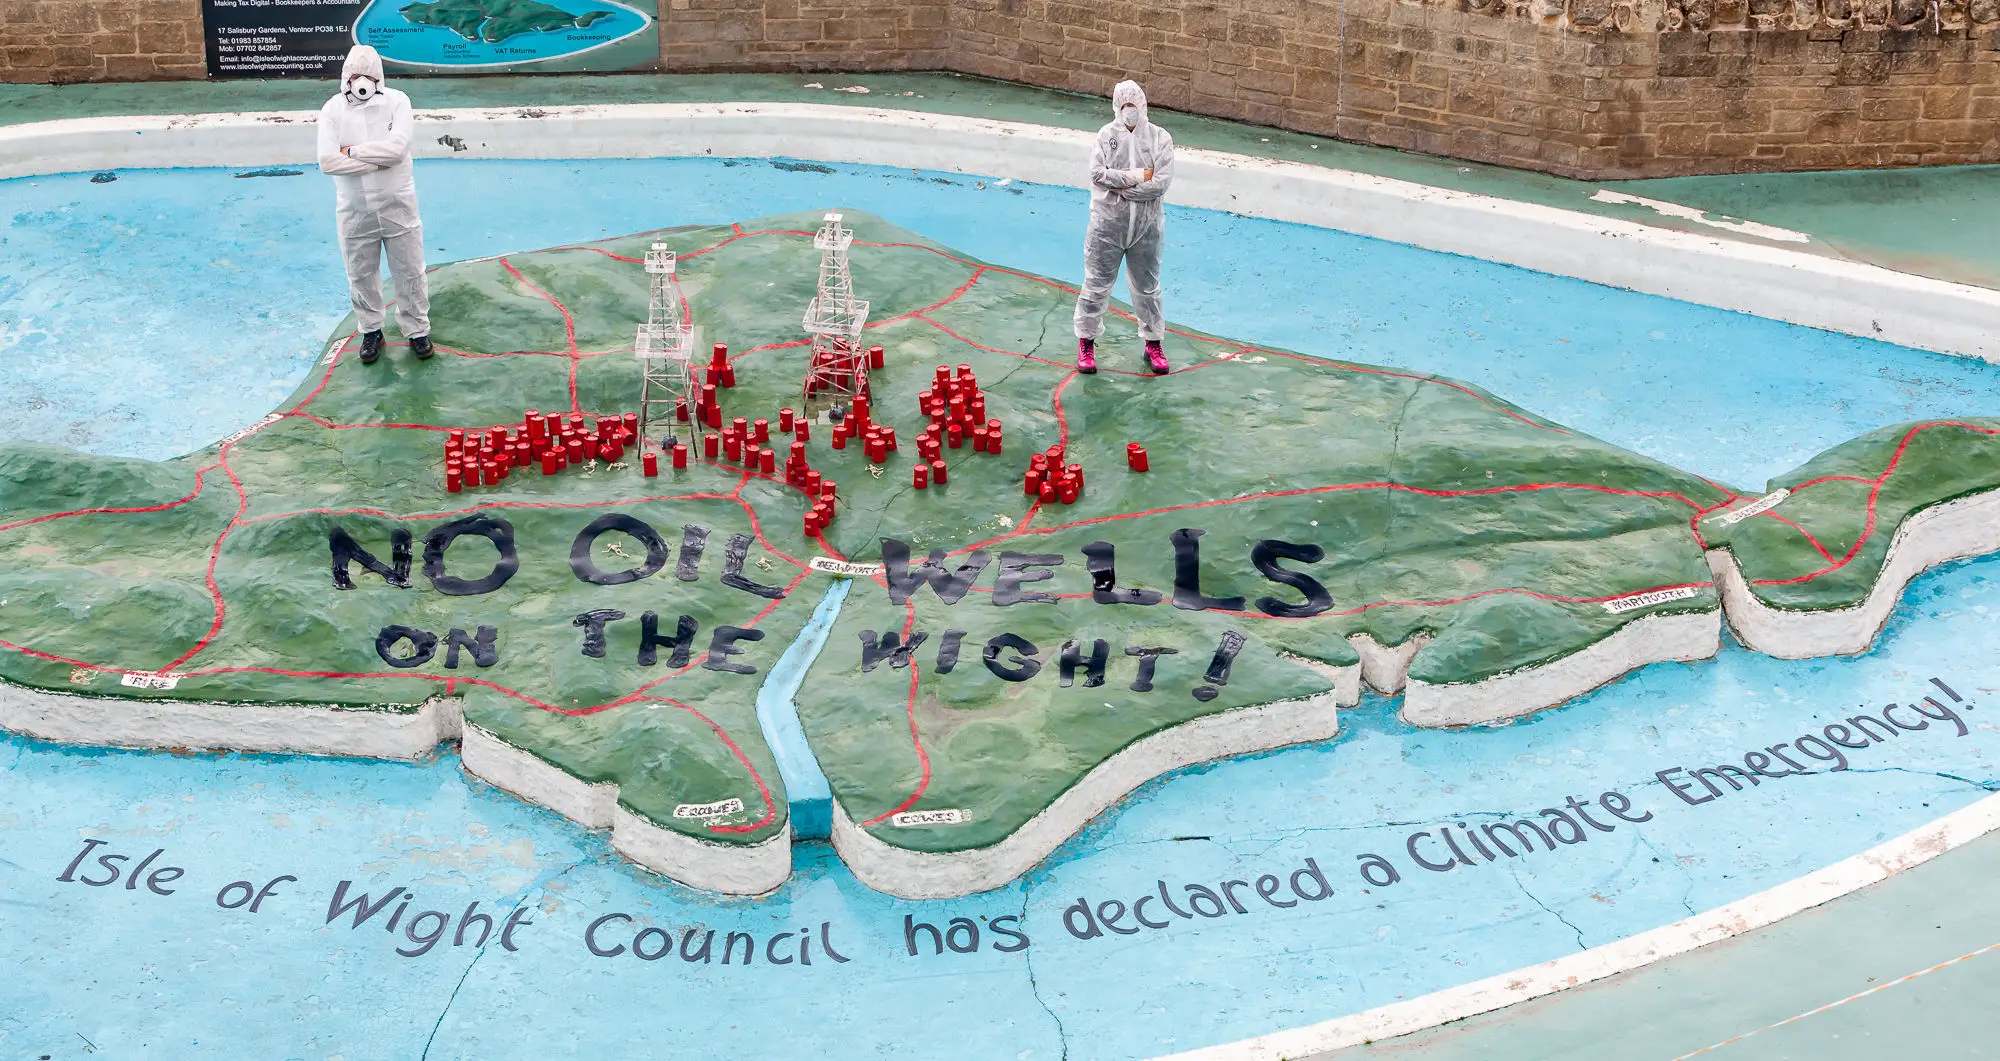 Environmentalists painted No oil wells on the Wight on the Ventnor Paddling Pool